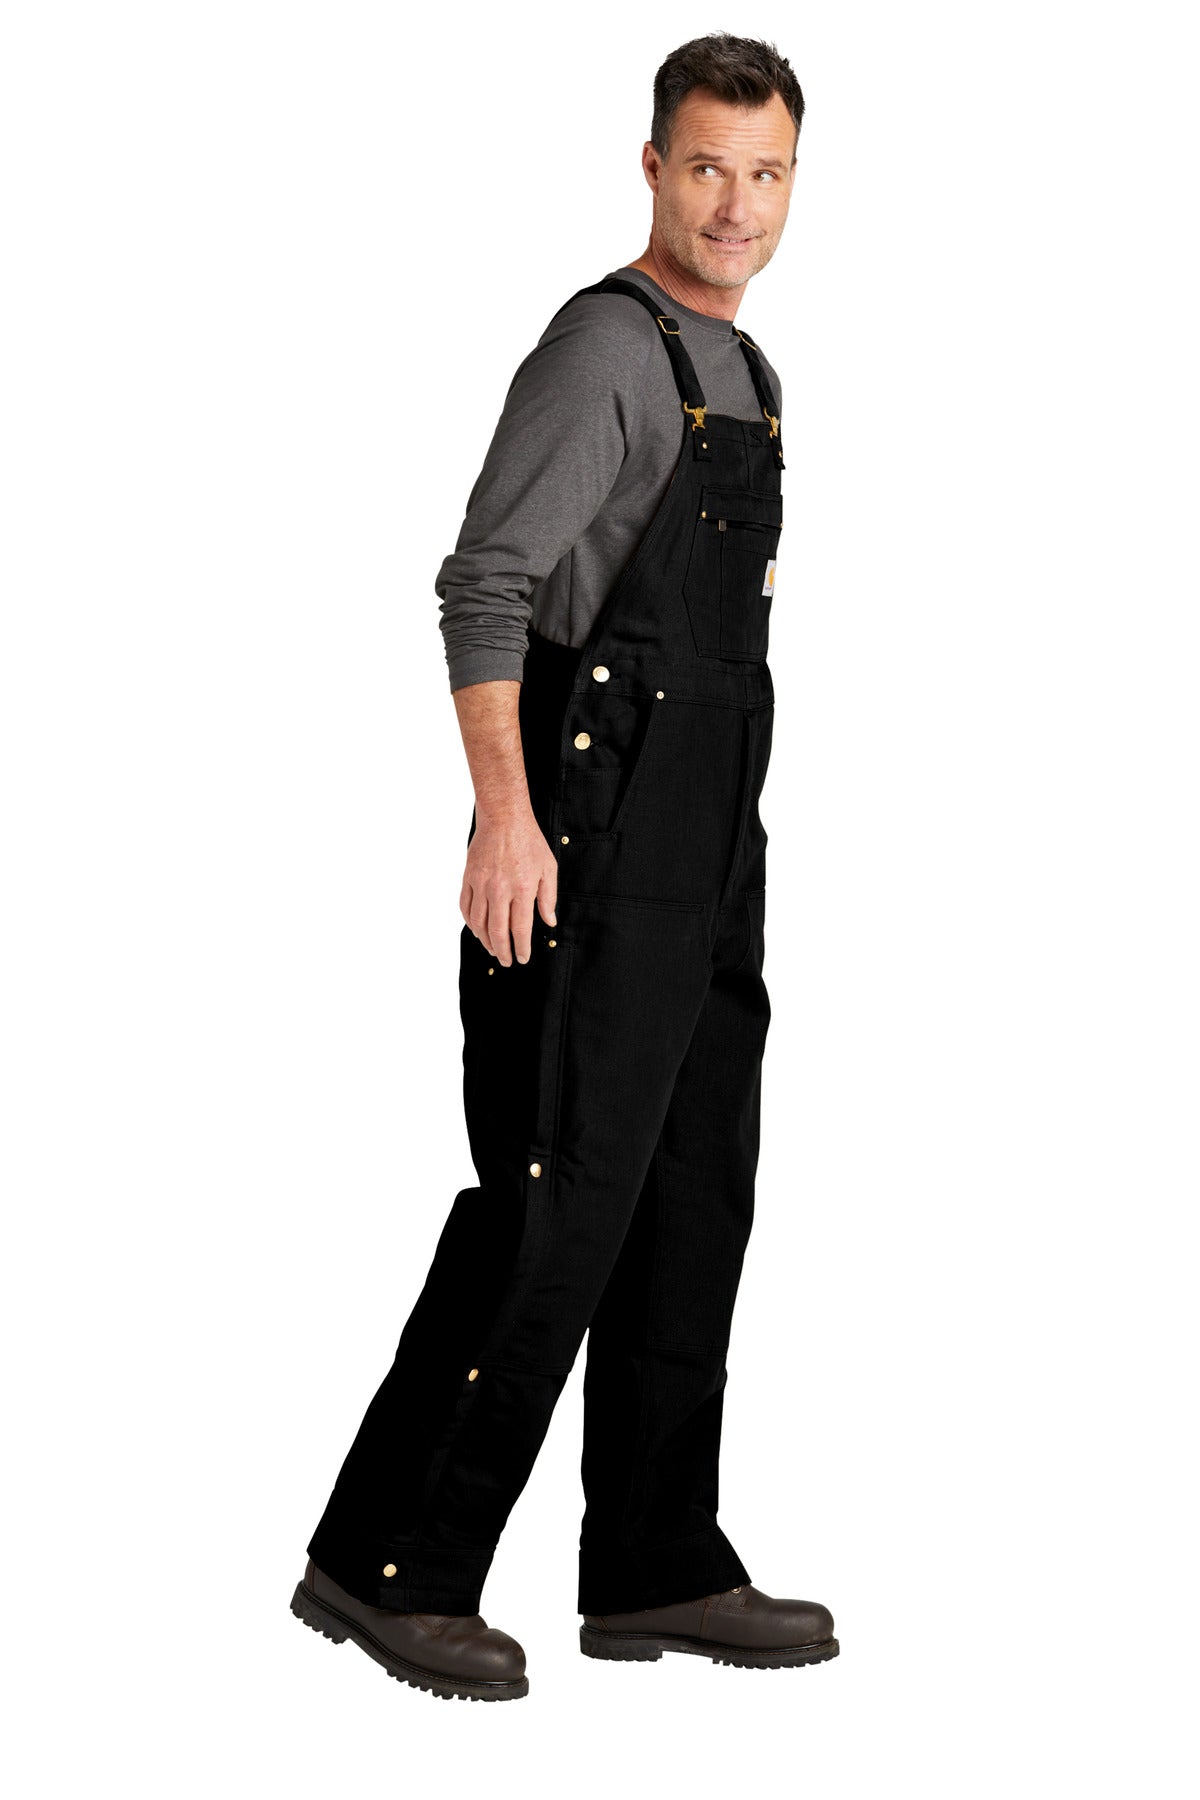 Carhartt Men's Loose Fit Firm Duck Insulated Bib Overall - Tall - Brown